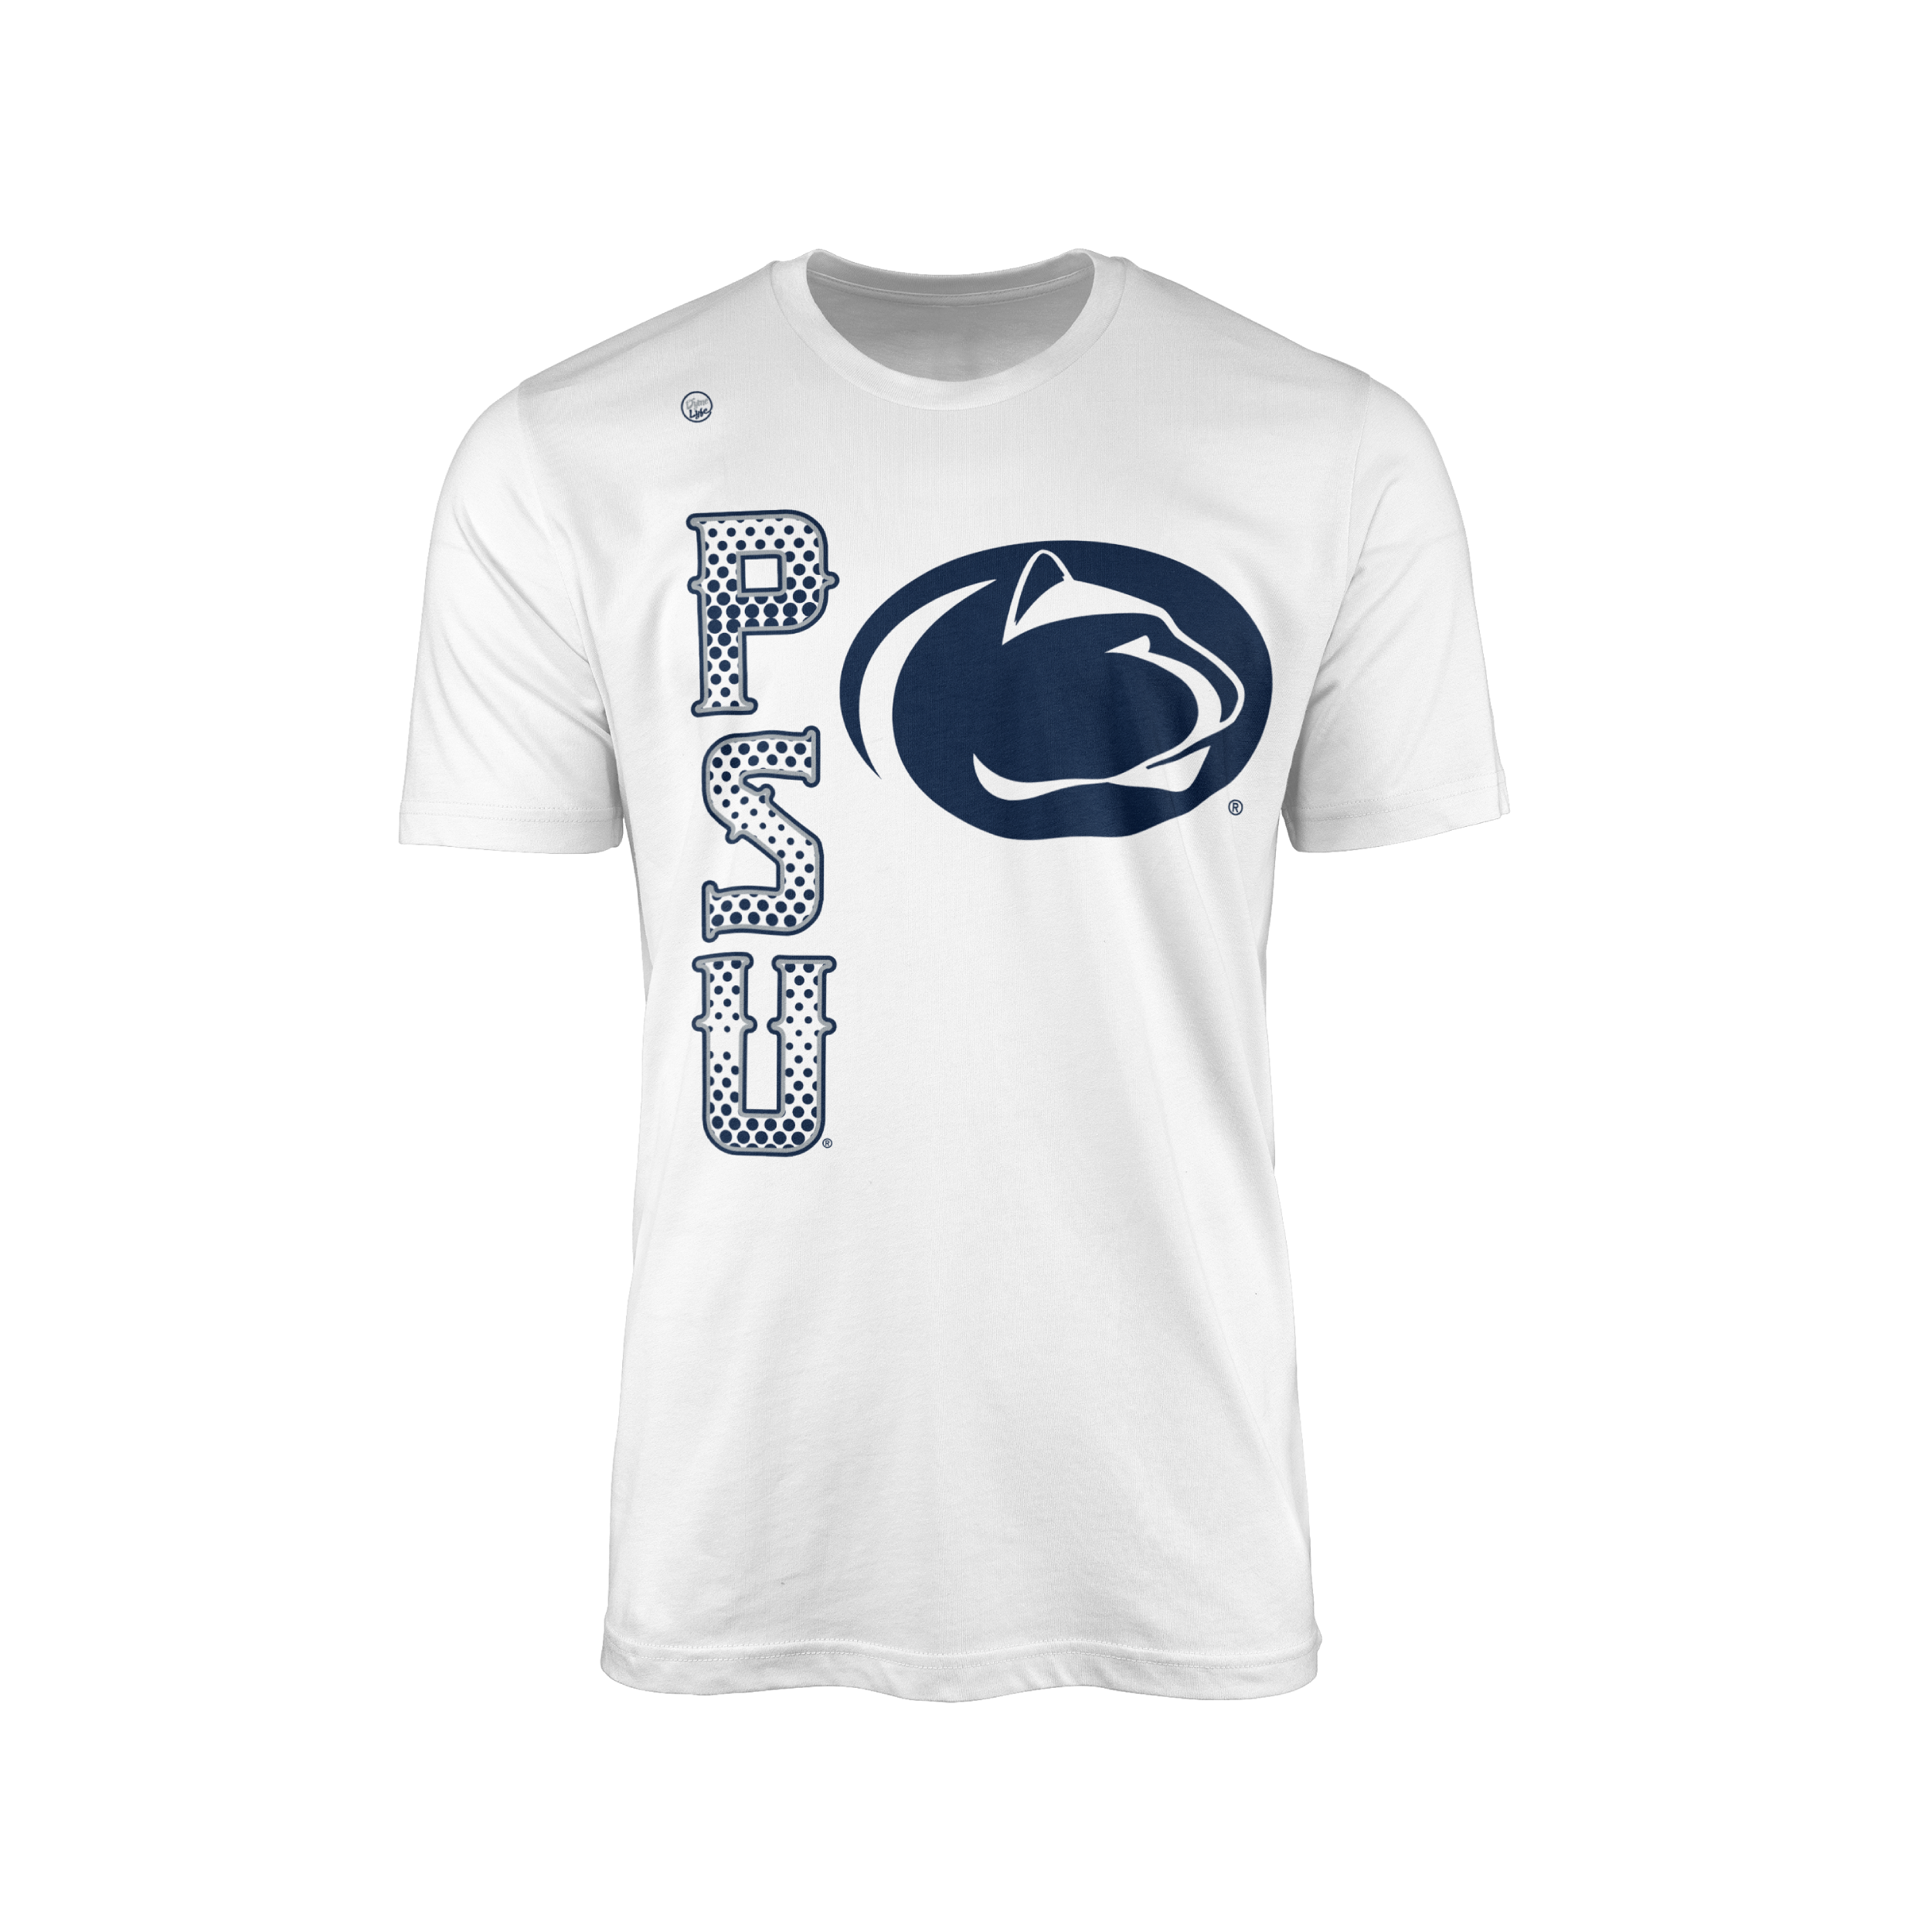 Penn State Nittany Lions Men’s Ace Tee